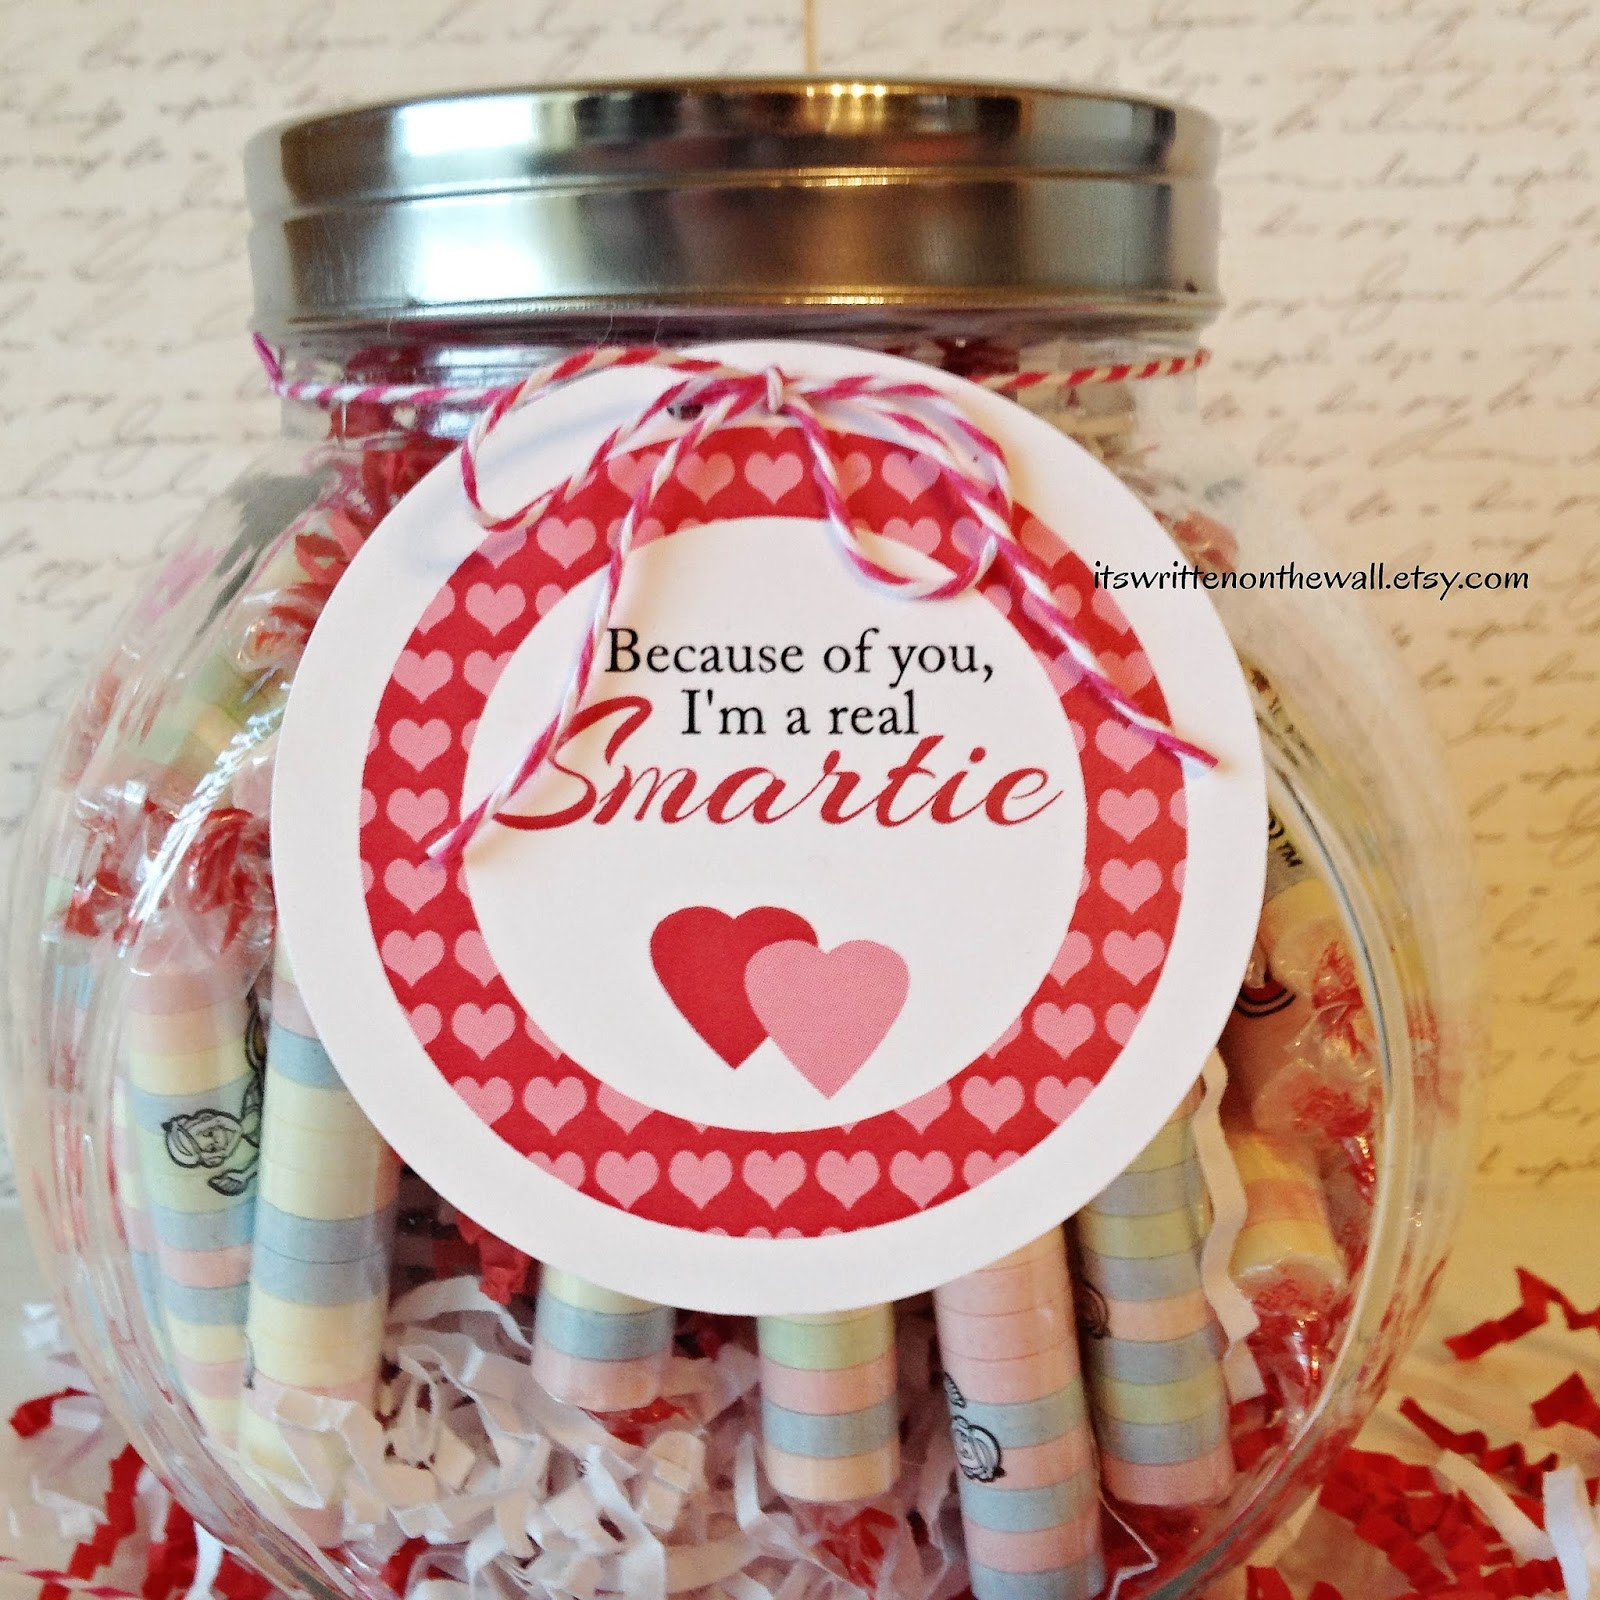 Gift Ideas For First Valentine'S Day
 It s Written on the Wall "Because of you I m a Smartie